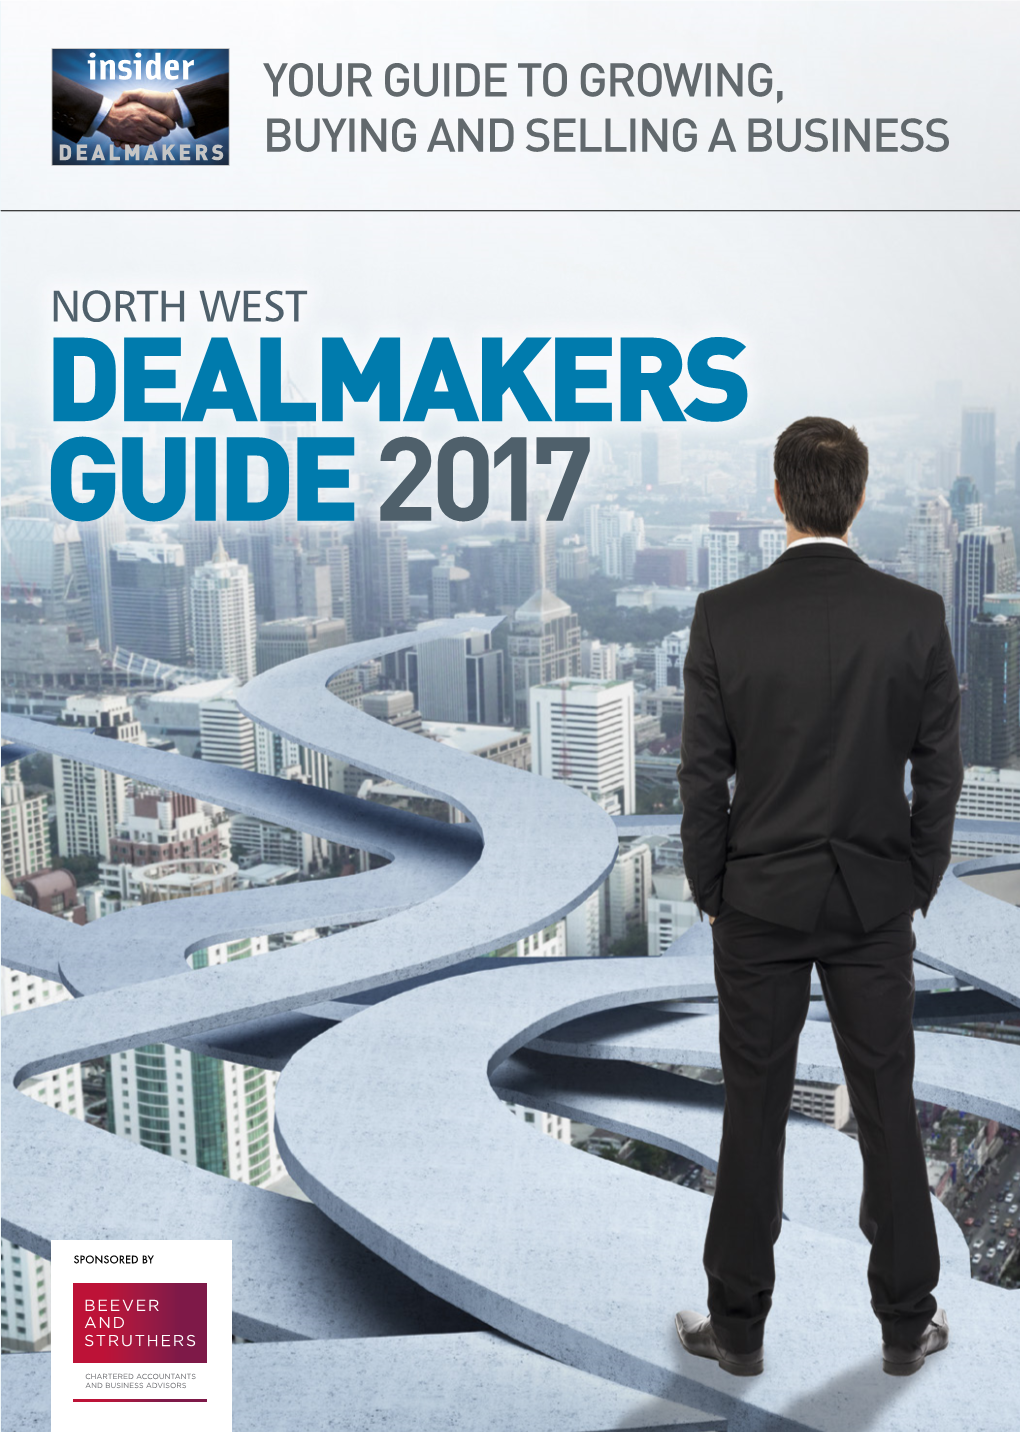 North West Dealmakers Guide 2017